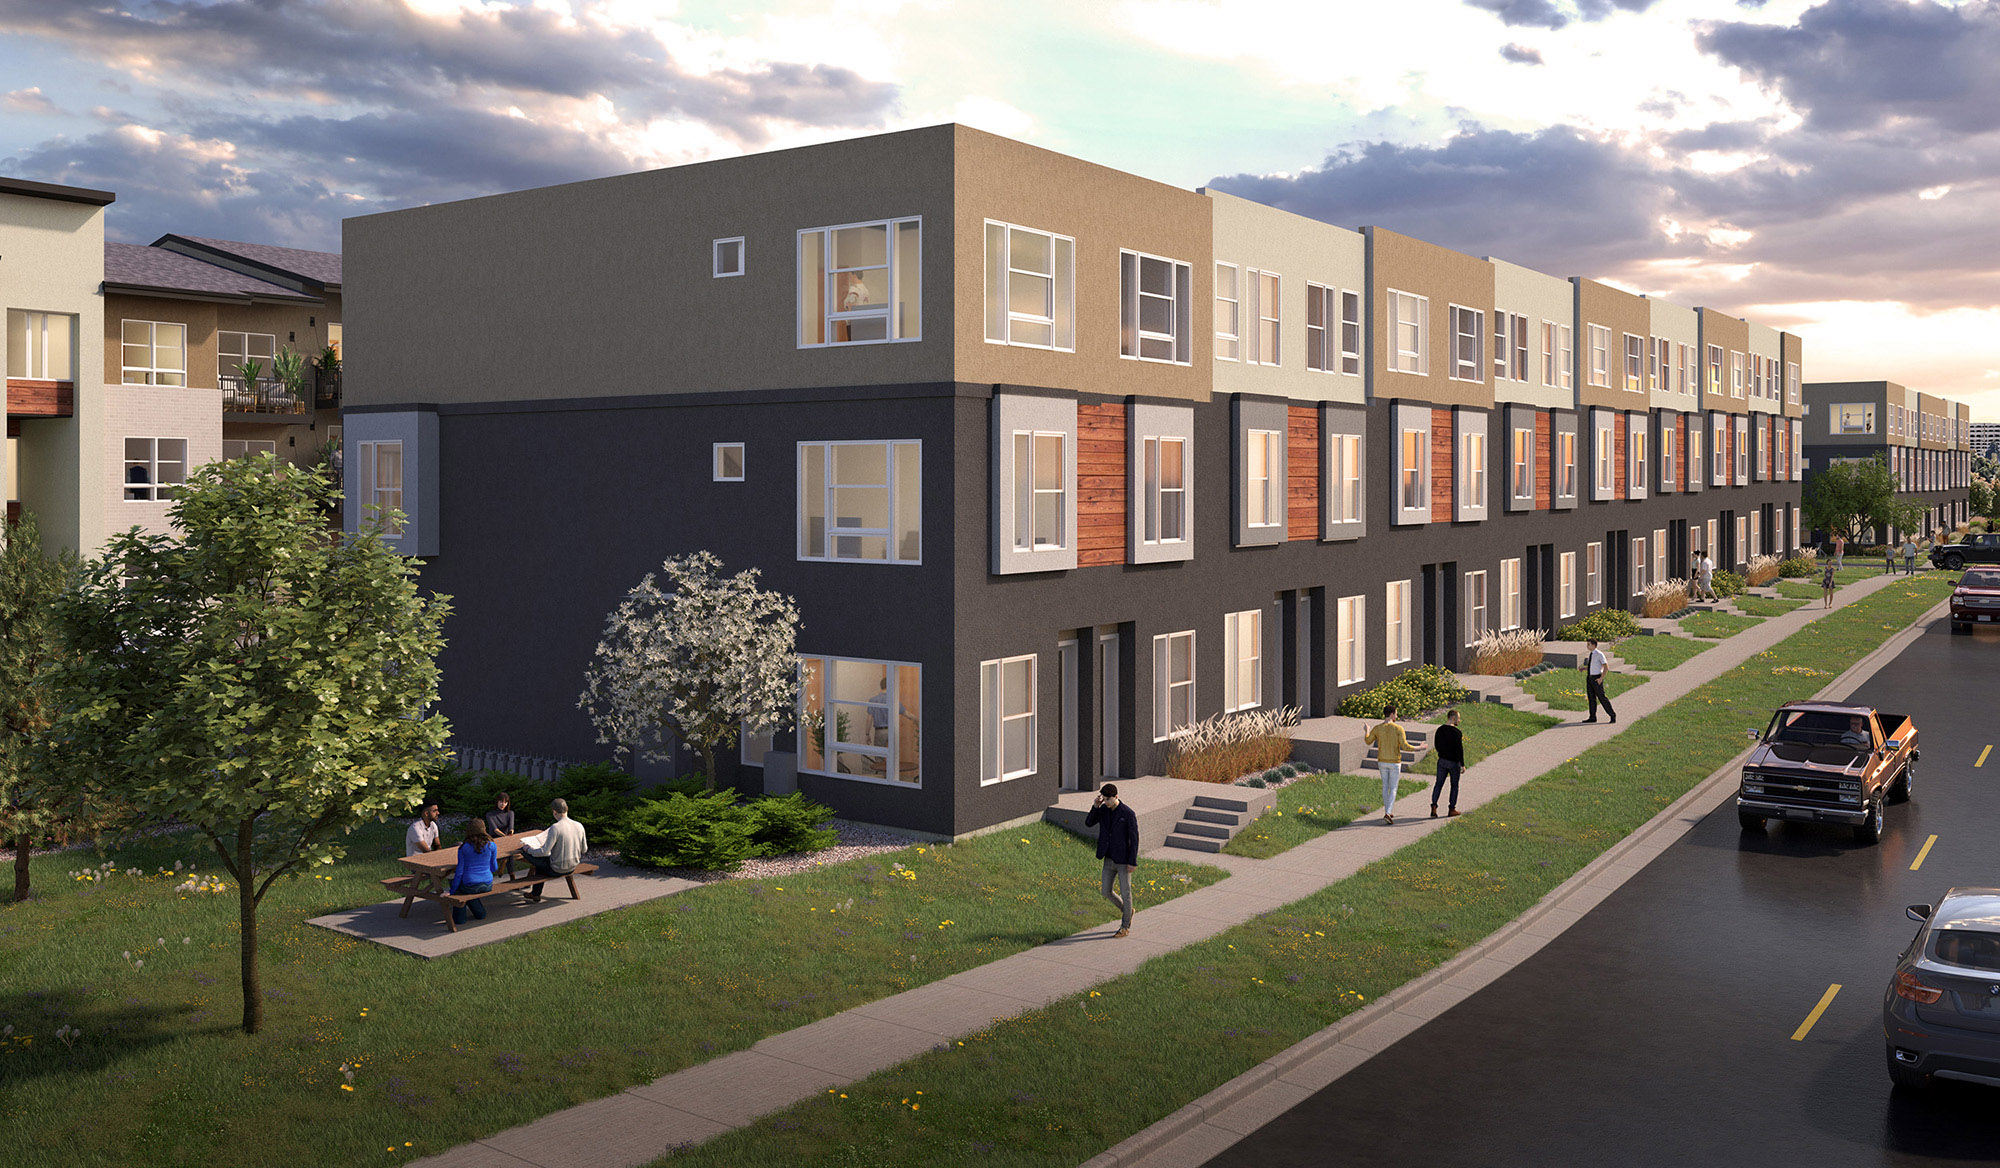 Plans for Northeast Park Hill 253-unit affordable housing project move a step forward